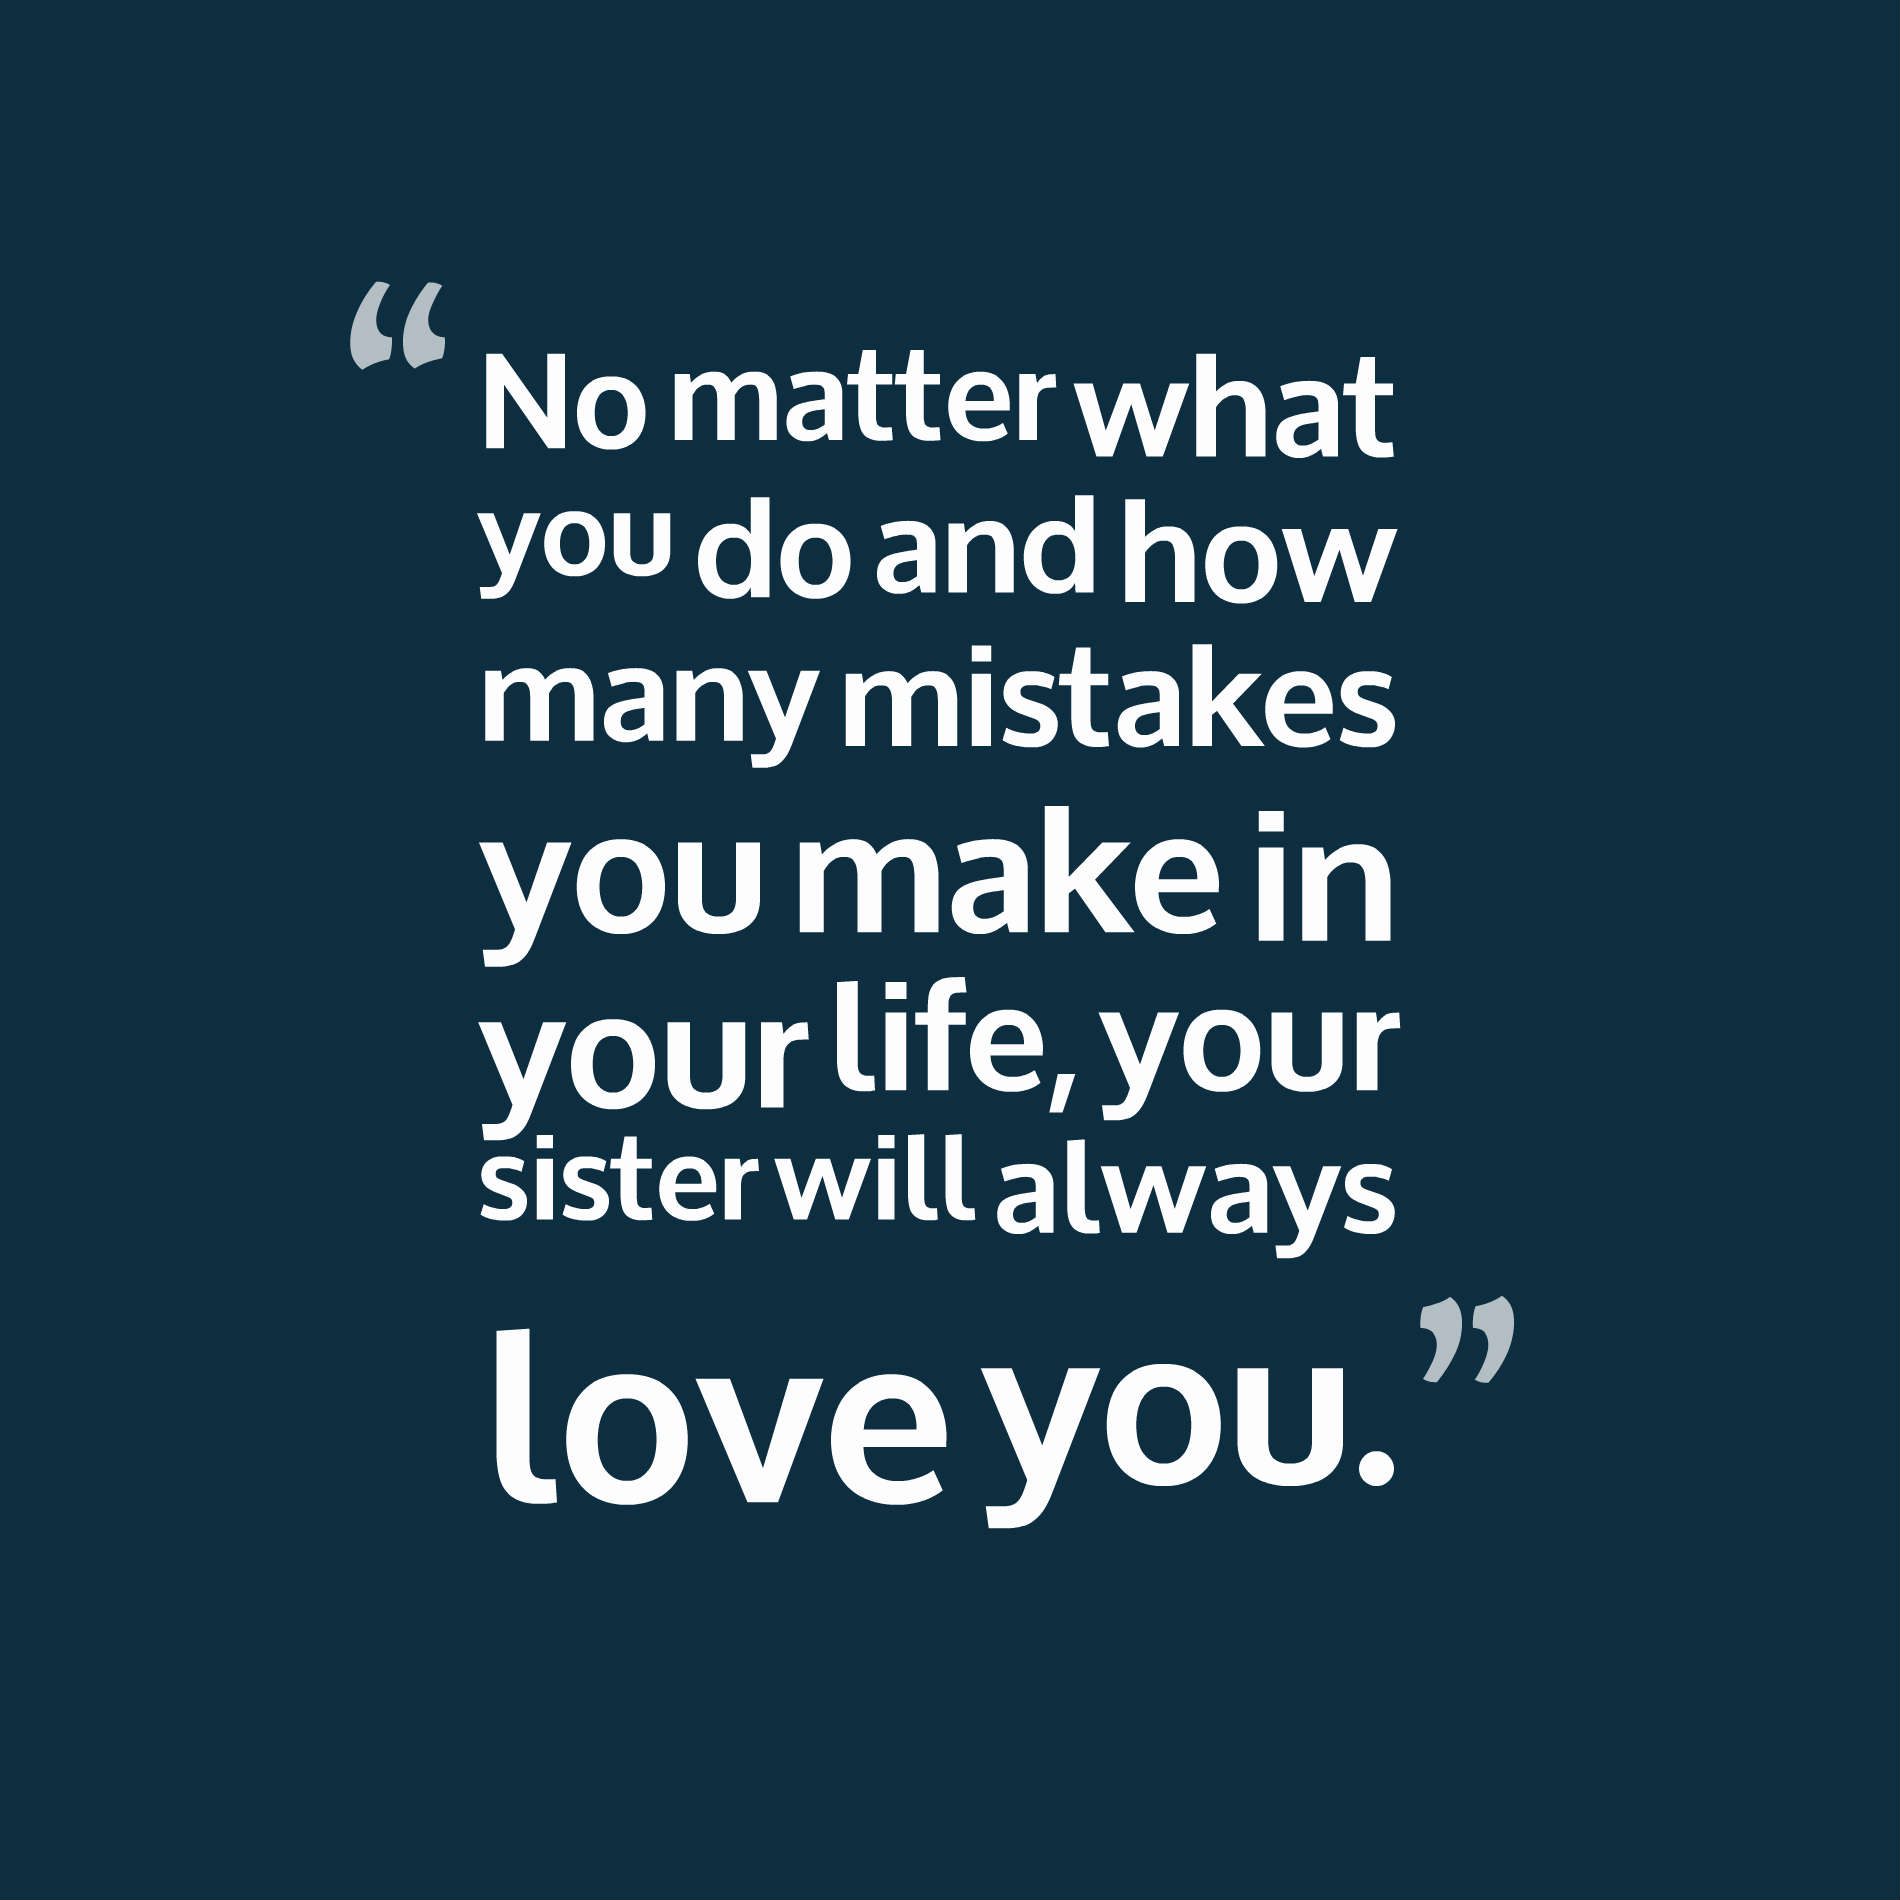 No matter what you do and how many mistakes you make in your life, your sister will always love you.